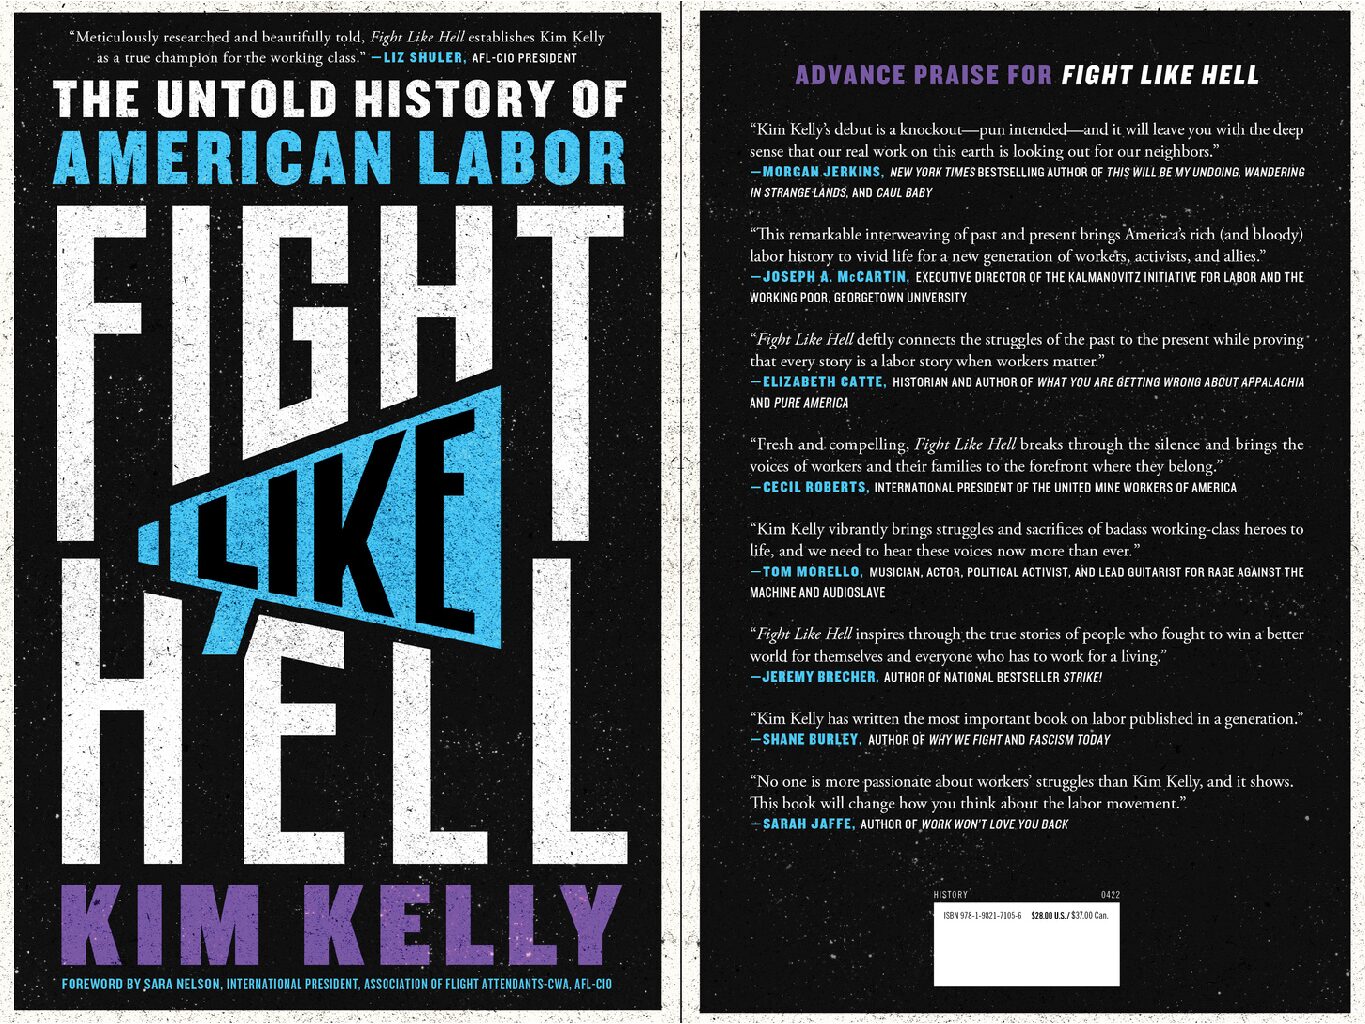 Book Review: Kim Kelly’s Fight Like Hell is an inspiring introduction to working class struggle